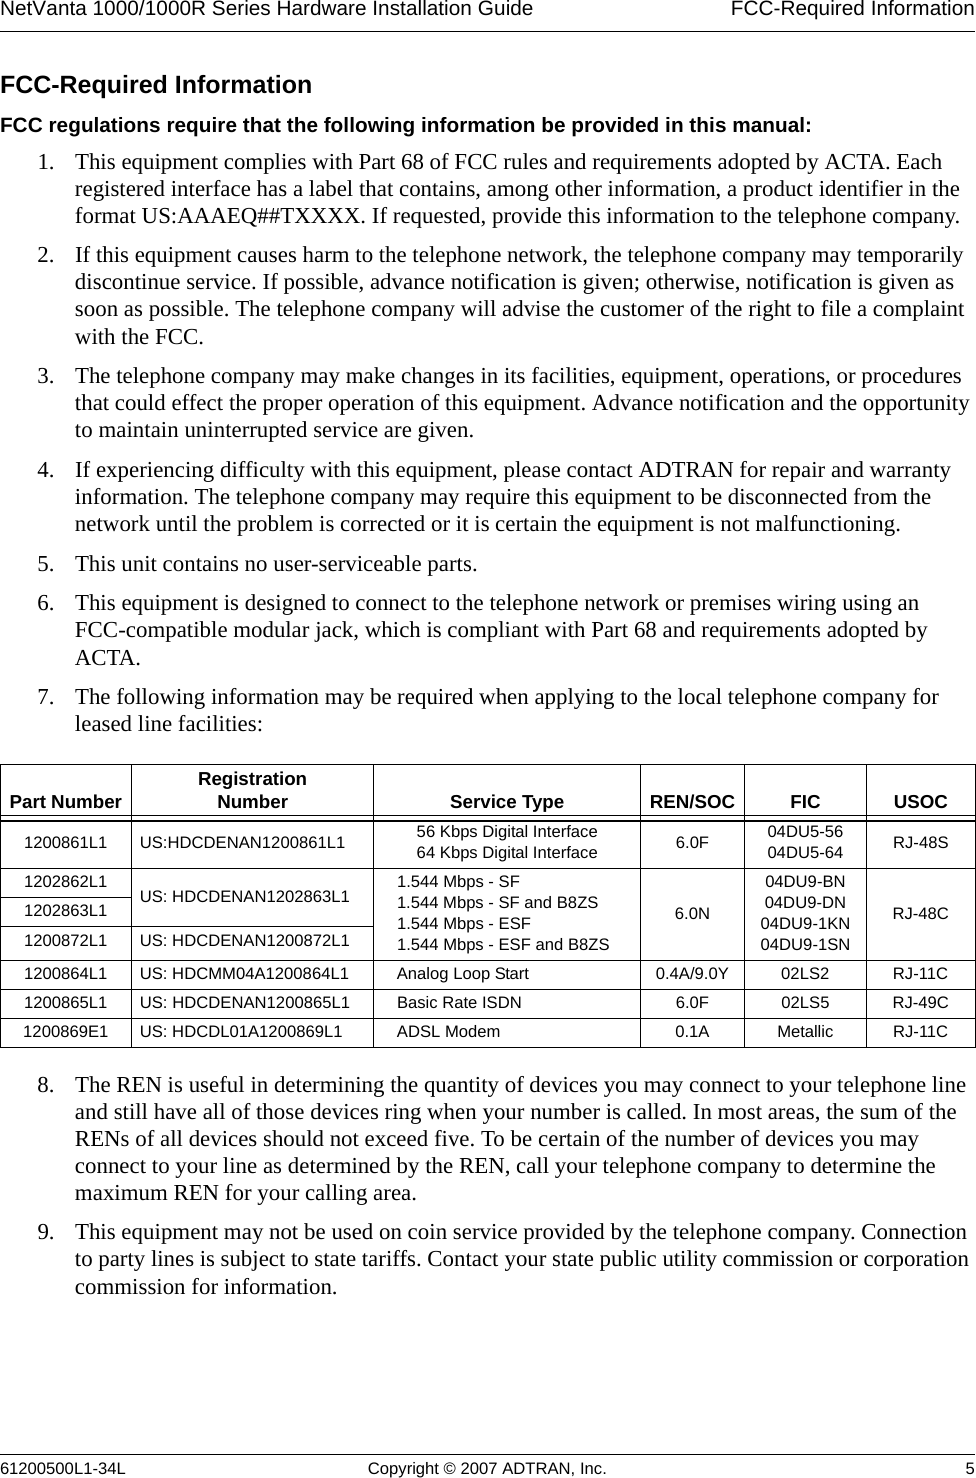 NetVanta 1000/1000R Series Hardware Installation Guide  FCC-Required Information61200500L1-34L Copyright © 2007 ADTRAN, Inc. 5FCC-Required InformationFCC regulations require that the following information be provided in this manual:1. This equipment complies with Part 68 of FCC rules and requirements adopted by ACTA. Each registered interface has a label that contains, among other information, a product identifier in the format US:AAAEQ##TXXXX. If requested, provide this information to the telephone company.2. If this equipment causes harm to the telephone network, the telephone company may temporarily discontinue service. If possible, advance notification is given; otherwise, notification is given as soon as possible. The telephone company will advise the customer of the right to file a complaint with the FCC.3. The telephone company may make changes in its facilities, equipment, operations, or procedures that could effect the proper operation of this equipment. Advance notification and the opportunity to maintain uninterrupted service are given. 4. If experiencing difficulty with this equipment, please contact ADTRAN for repair and warranty information. The telephone company may require this equipment to be disconnected from the network until the problem is corrected or it is certain the equipment is not malfunctioning.5. This unit contains no user-serviceable parts.6. This equipment is designed to connect to the telephone network or premises wiring using an FCC-compatible modular jack, which is compliant with Part 68 and requirements adopted by ACTA.7. The following information may be required when applying to the local telephone company for leased line facilities:8. The REN is useful in determining the quantity of devices you may connect to your telephone line and still have all of those devices ring when your number is called. In most areas, the sum of the RENs of all devices should not exceed five. To be certain of the number of devices you may connect to your line as determined by the REN, call your telephone company to determine the maximum REN for your calling area.9. This equipment may not be used on coin service provided by the telephone company. Connection to party lines is subject to state tariffs. Contact your state public utility commission or corporation commission for information.Part Number RegistrationNumber Service Type REN/SOC FIC USOC1200861L1 US:HDCDENAN1200861L1 56 Kbps Digital Interface64 Kbps Digital Interface 6.0F 04DU5-5604DU5-64 RJ-48S1202862L1 US: HDCDENAN1202863L1 1.544 Mbps - SF1.544 Mbps - SF and B8ZS1.544 Mbps - ESF1.544 Mbps - ESF and B8ZS6.0N04DU9-BN04DU9-DN04DU9-1KN04DU9-1SNRJ-48C1202863L11200872L1 US: HDCDENAN1200872L11200864L1 US: HDCMM04A1200864L1 Analog Loop Start 0.4A/9.0Y 02LS2 RJ-11C1200865L1 US: HDCDENAN1200865L1 Basic Rate ISDN 6.0F 02LS5 RJ-49C1200869E1 US: HDCDL01A1200869L1 ADSL Modem 0.1A Metallic RJ-11C